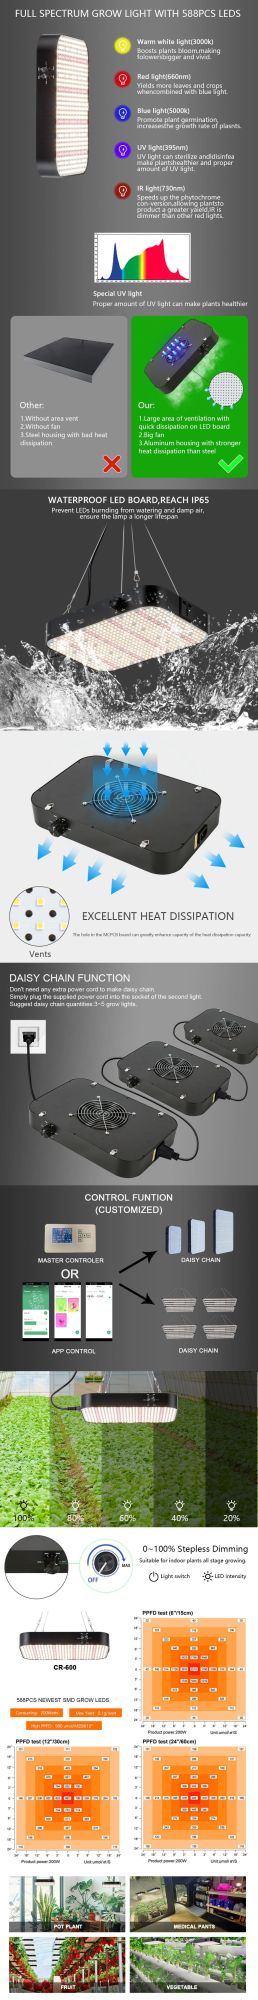 Full Spectrum Growing Lamp LED Grow Panel Light for Indoor Hydroponic Greenhouse Plants Veg and Flowers with Double Switch, Daisy Chain, Adjustable Rope Hanger